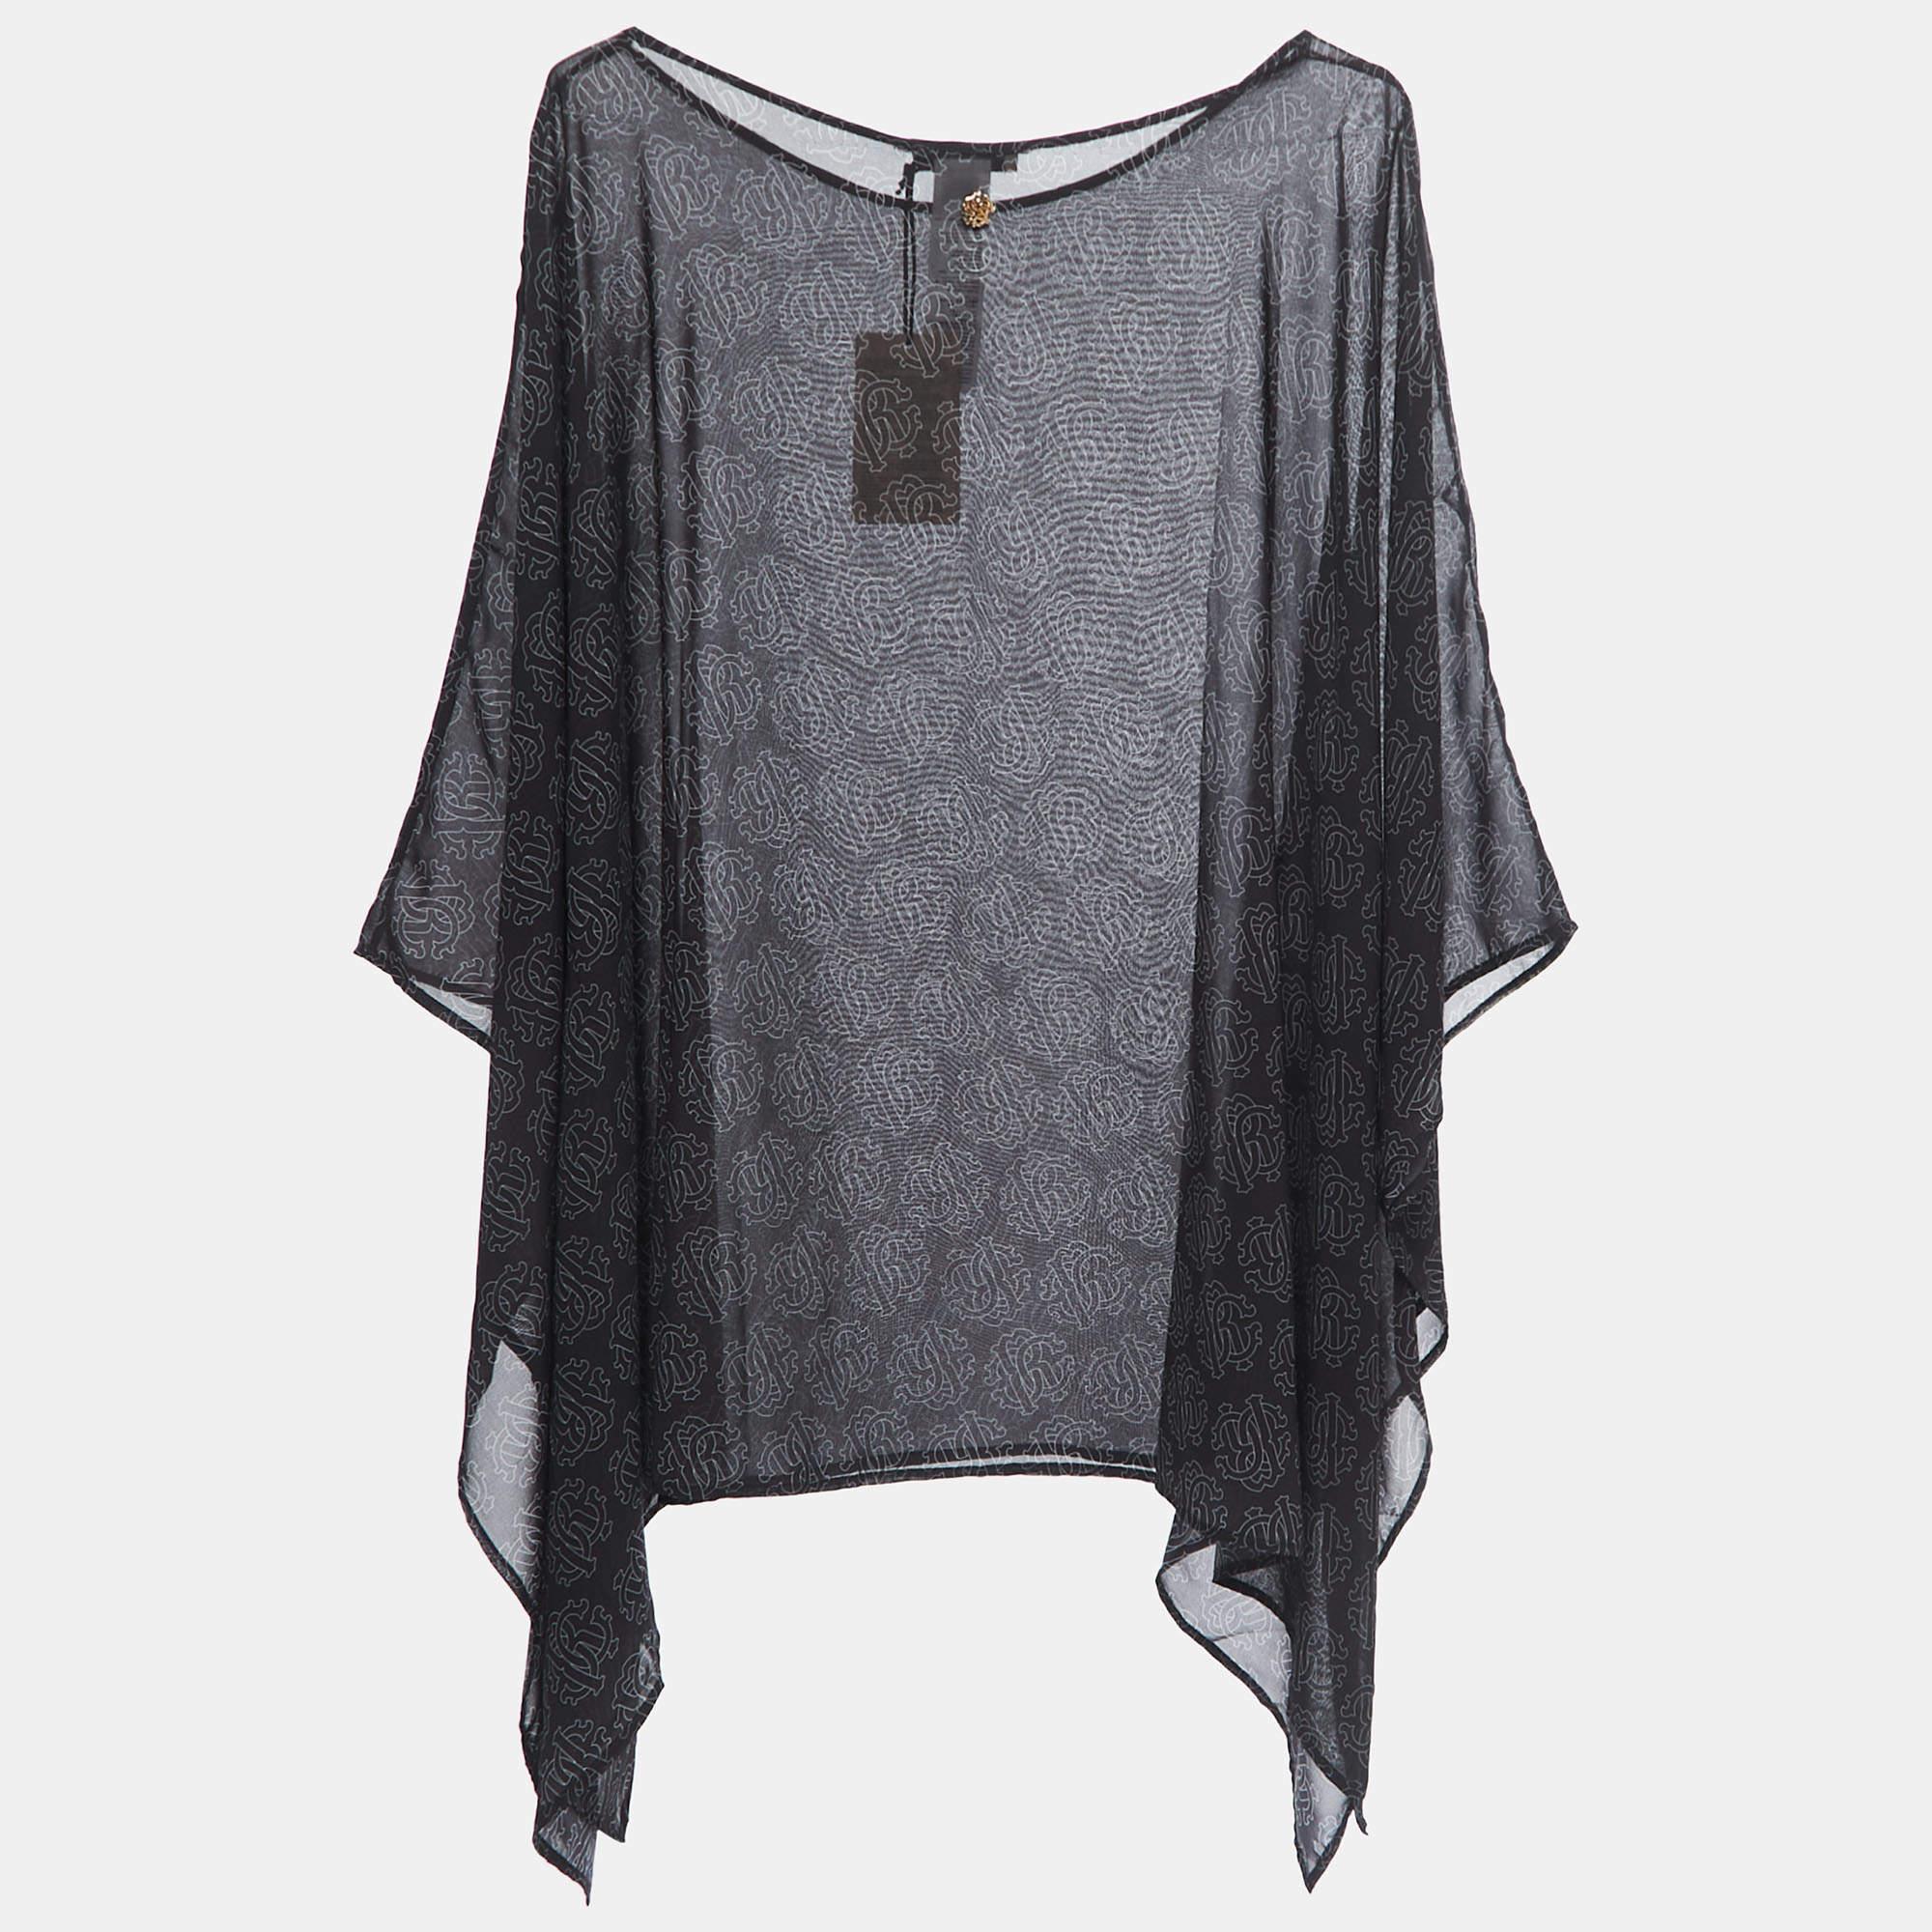 Crafted with exquisite attention to detail, it features a flowing kaftan silhouette in black, adorned with the iconic Roberto Cavalli logo print. This top effortlessly combines comfort and high-end style.

Includes: Price Tag